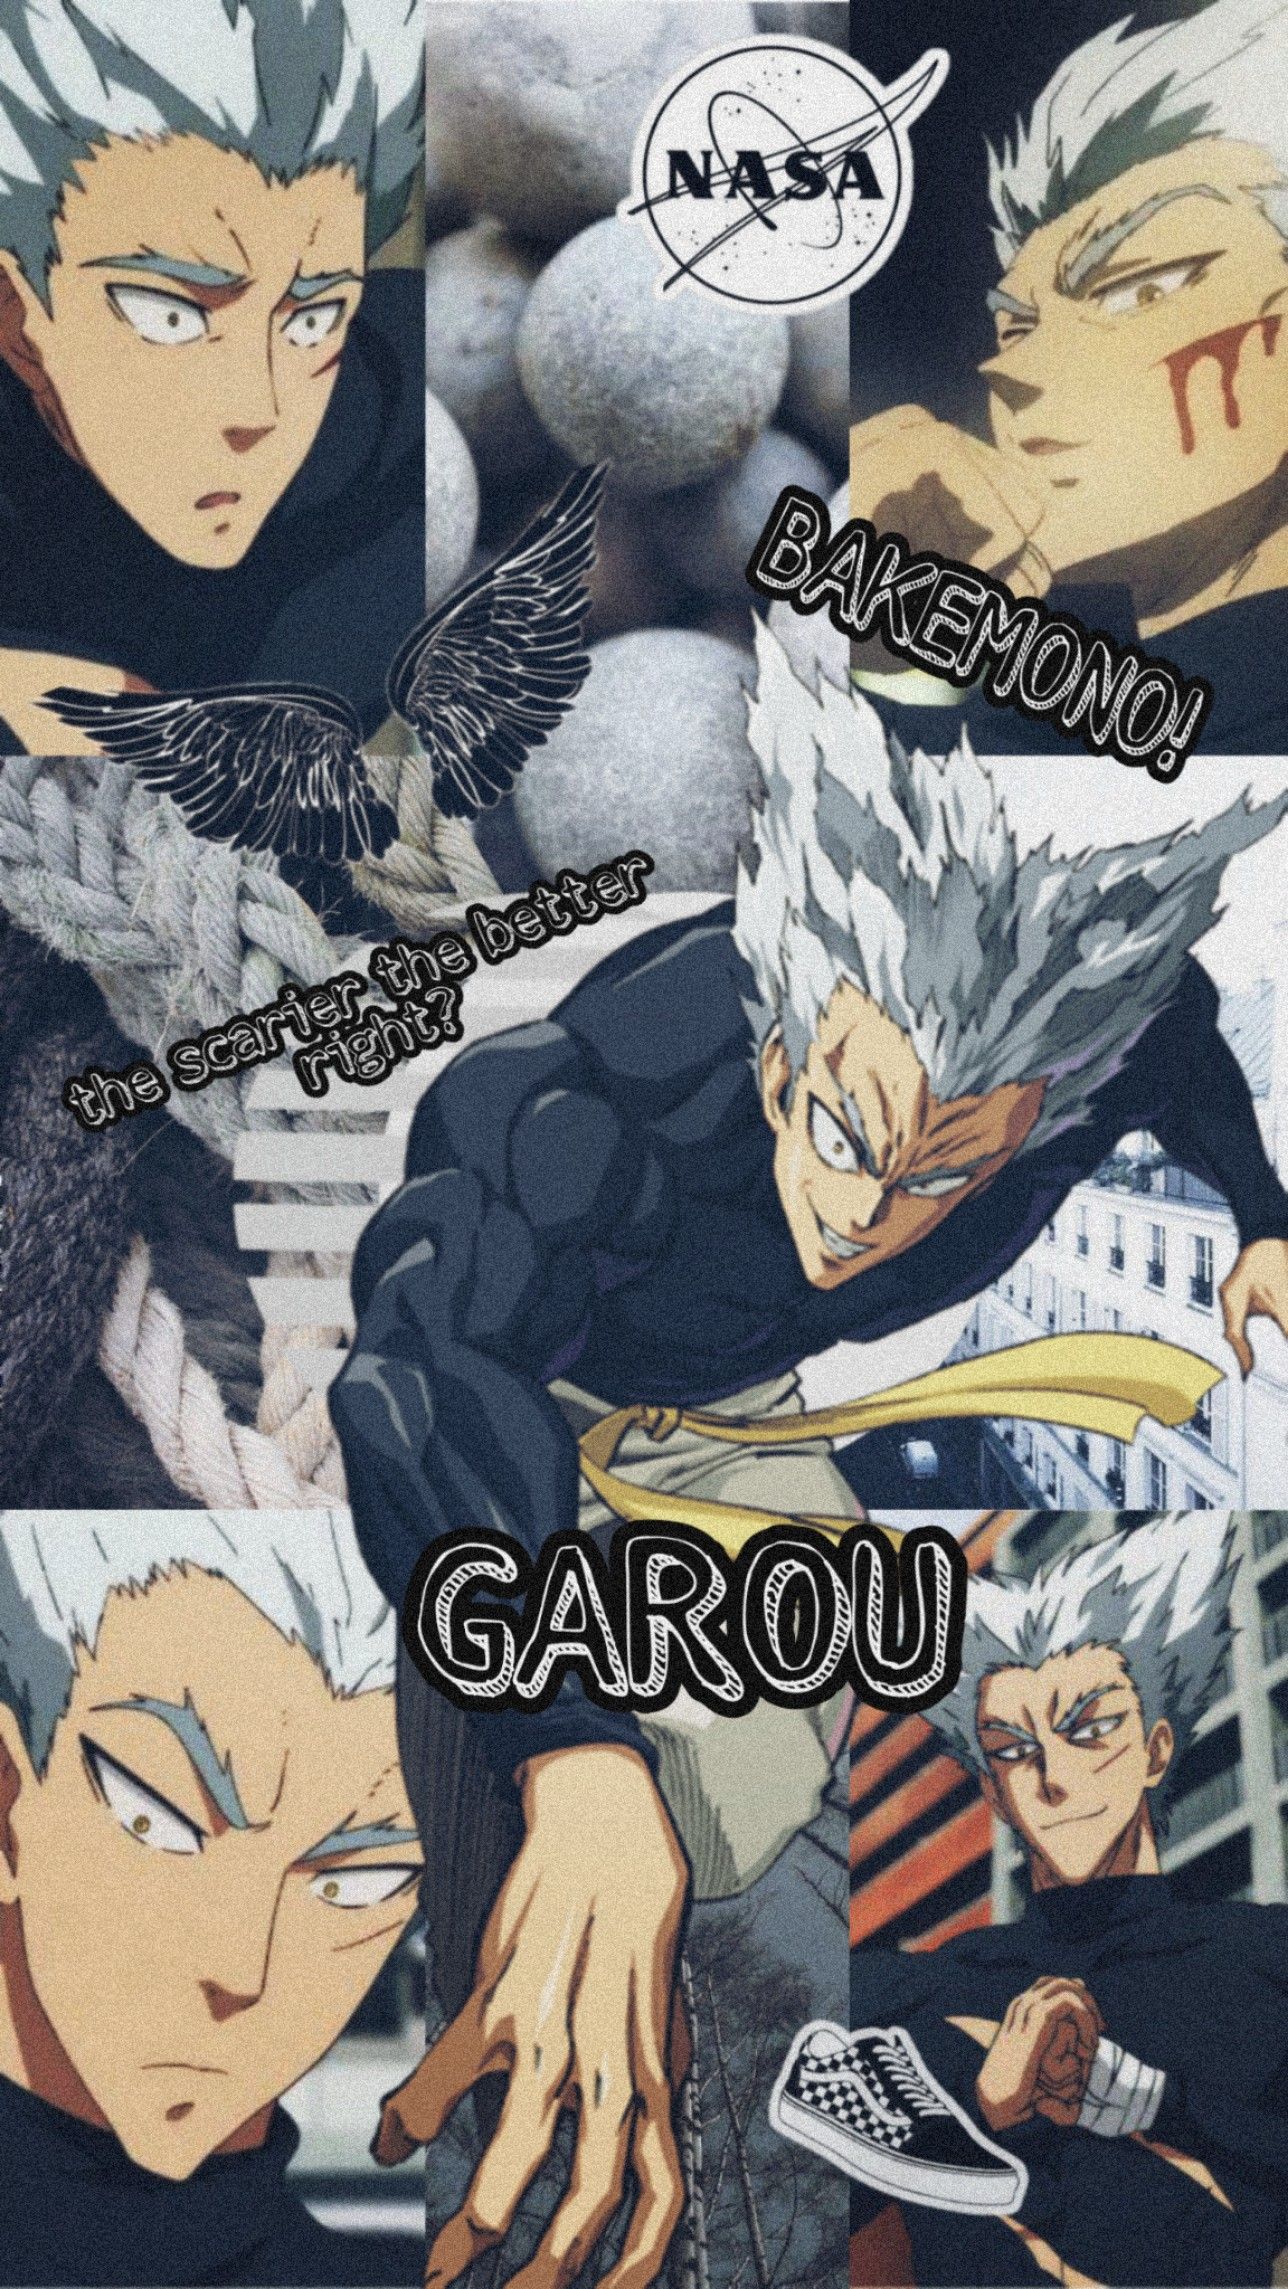 GAROU ONE PUNCH MAN. One punch man anime, One punch man, One punch